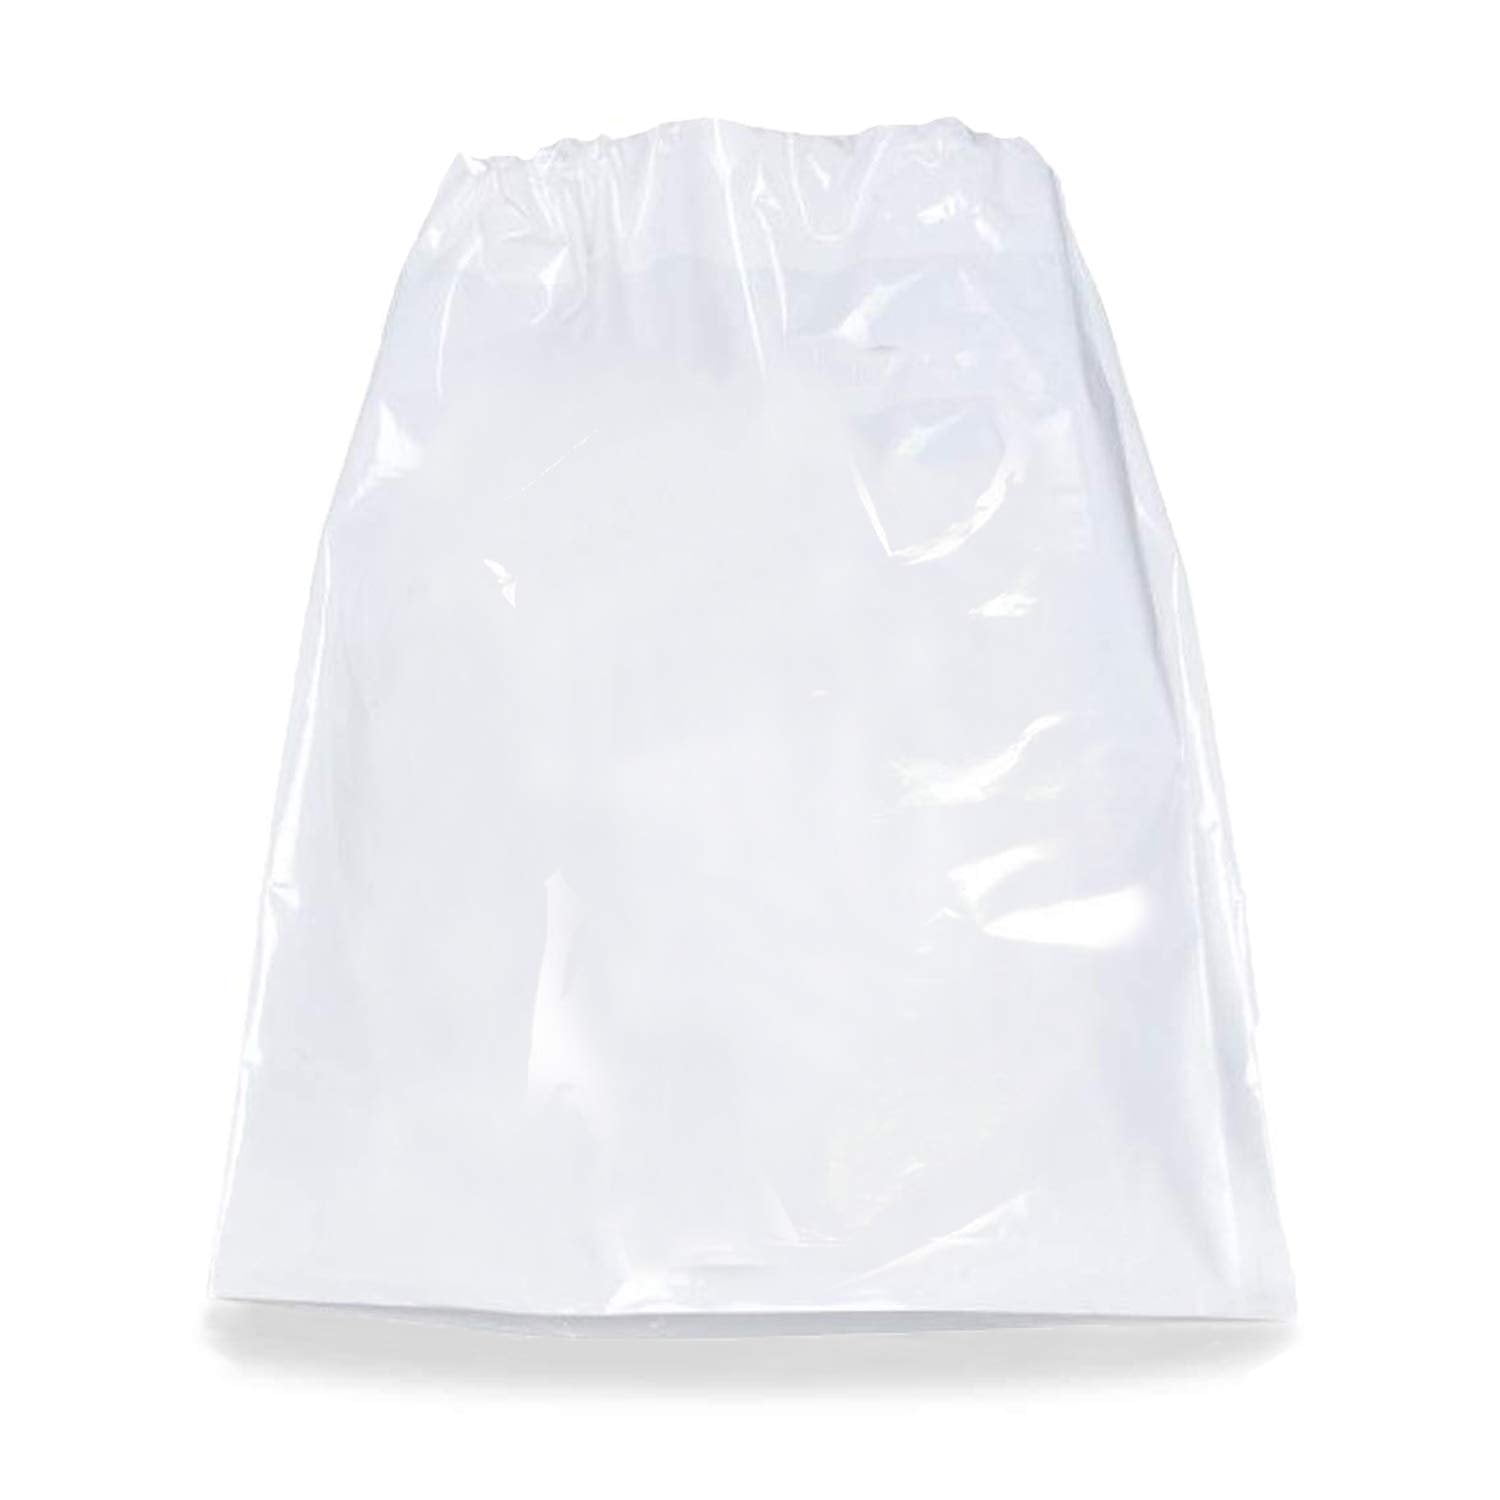 Colored Plastic Single Cotton Drawstring Poly Bags